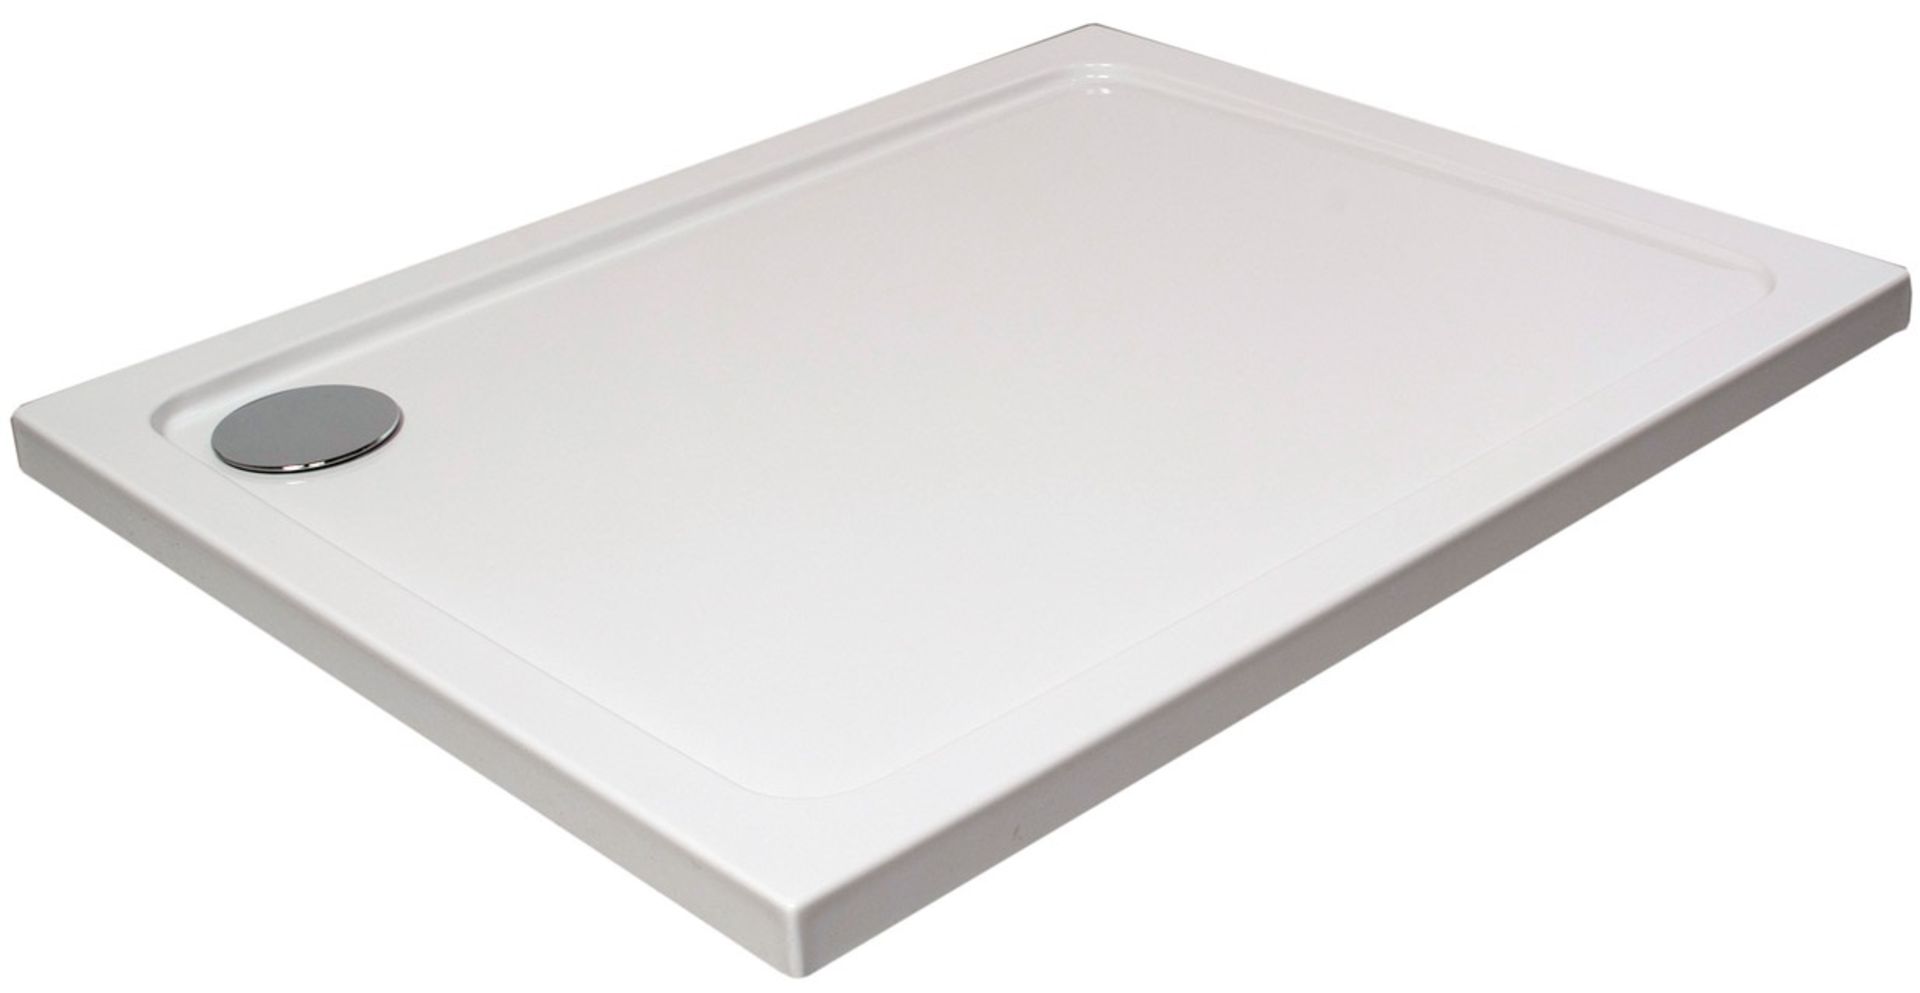 1 x Arley Hydro 45 White 1000 x 900mm Shower Tray - New & Boxed Stock - Ref: 238H1090